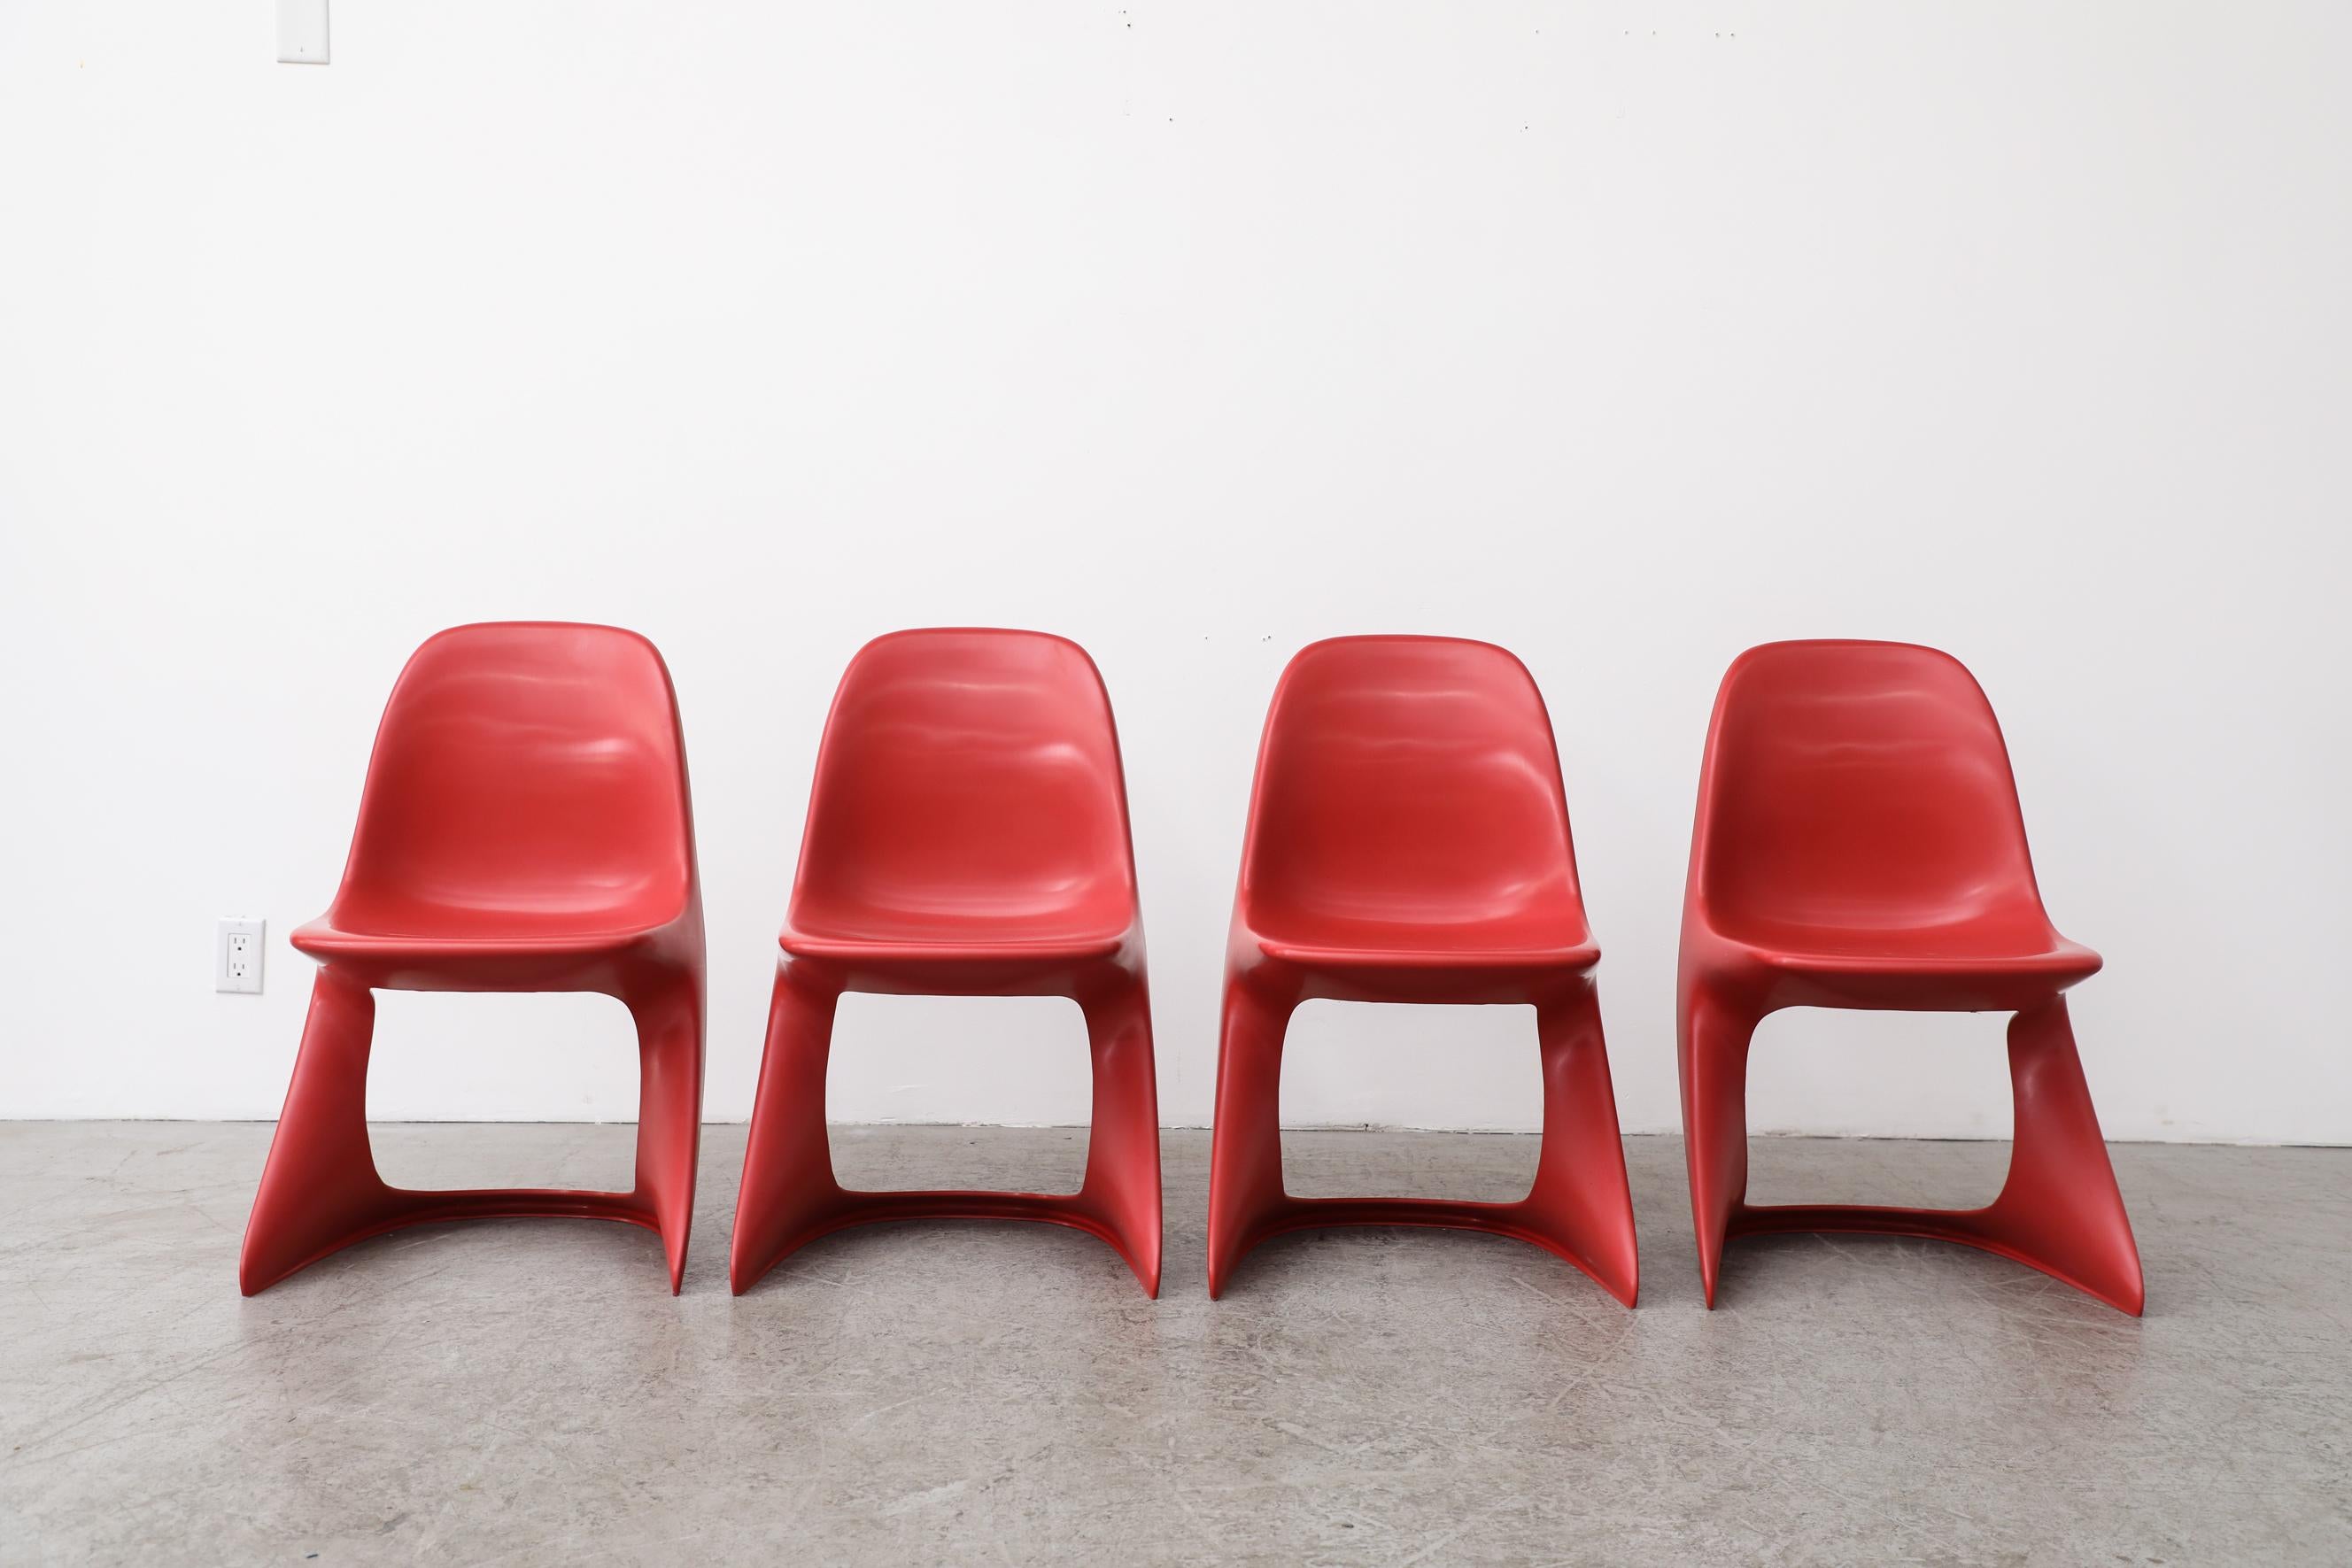 Set of four 1970's space age red plastic stacking Casalino Chairs by Alexander Begge. These cute little child-sized chairs easily stack. In original condition with visible wear, including scratching. Wear is consistent with their age and use.